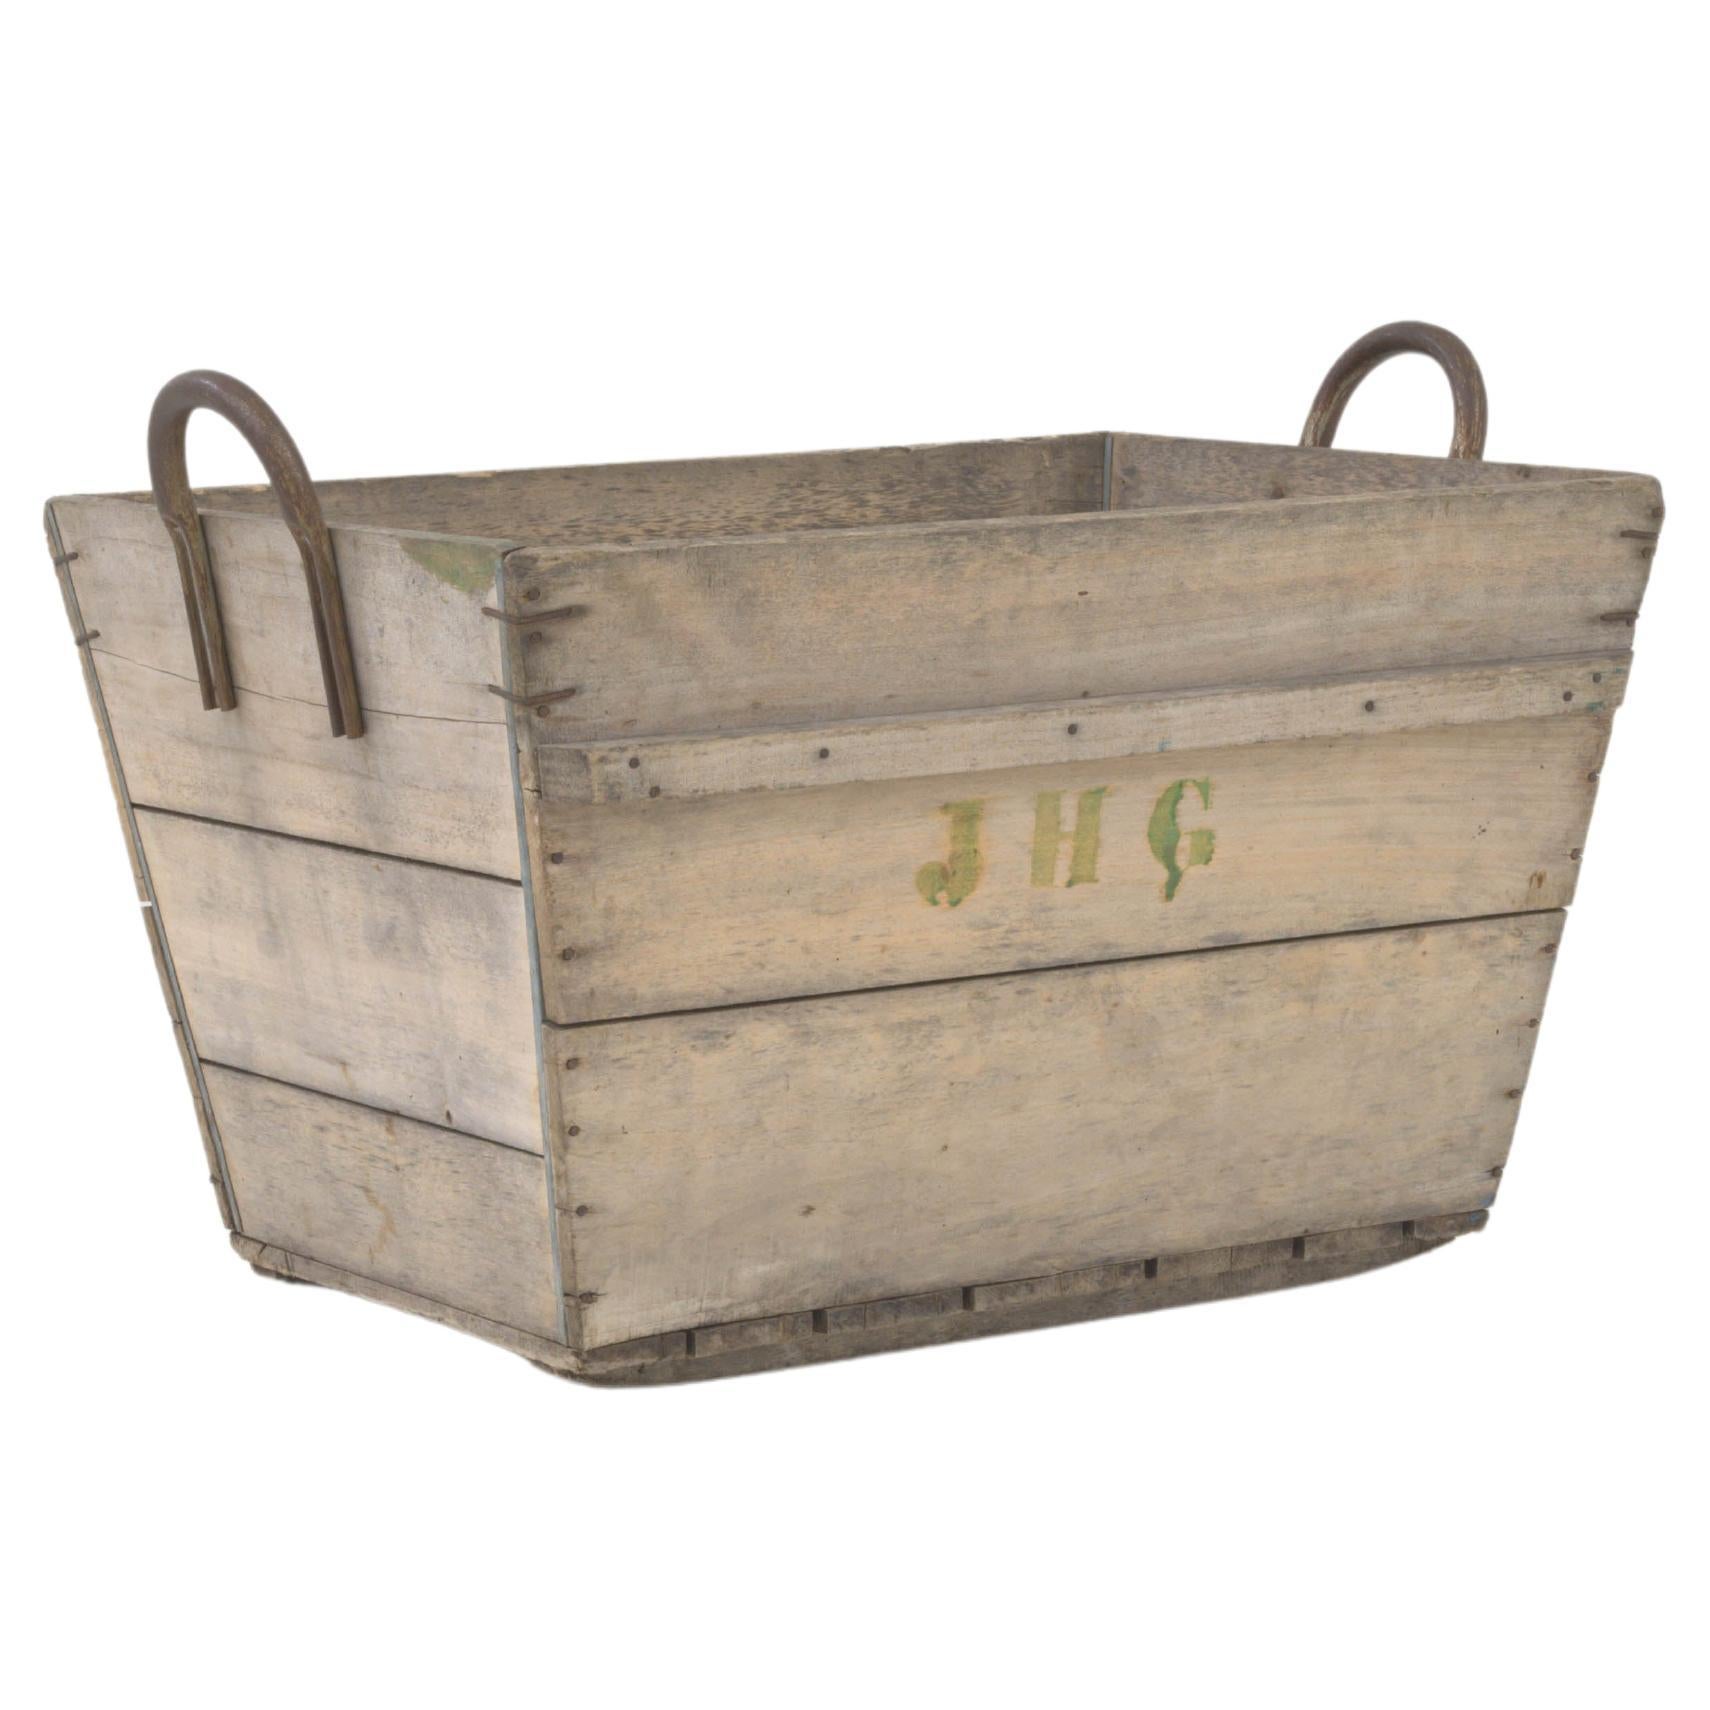 Early 20th Century French Wooden Grape Crate For Sale